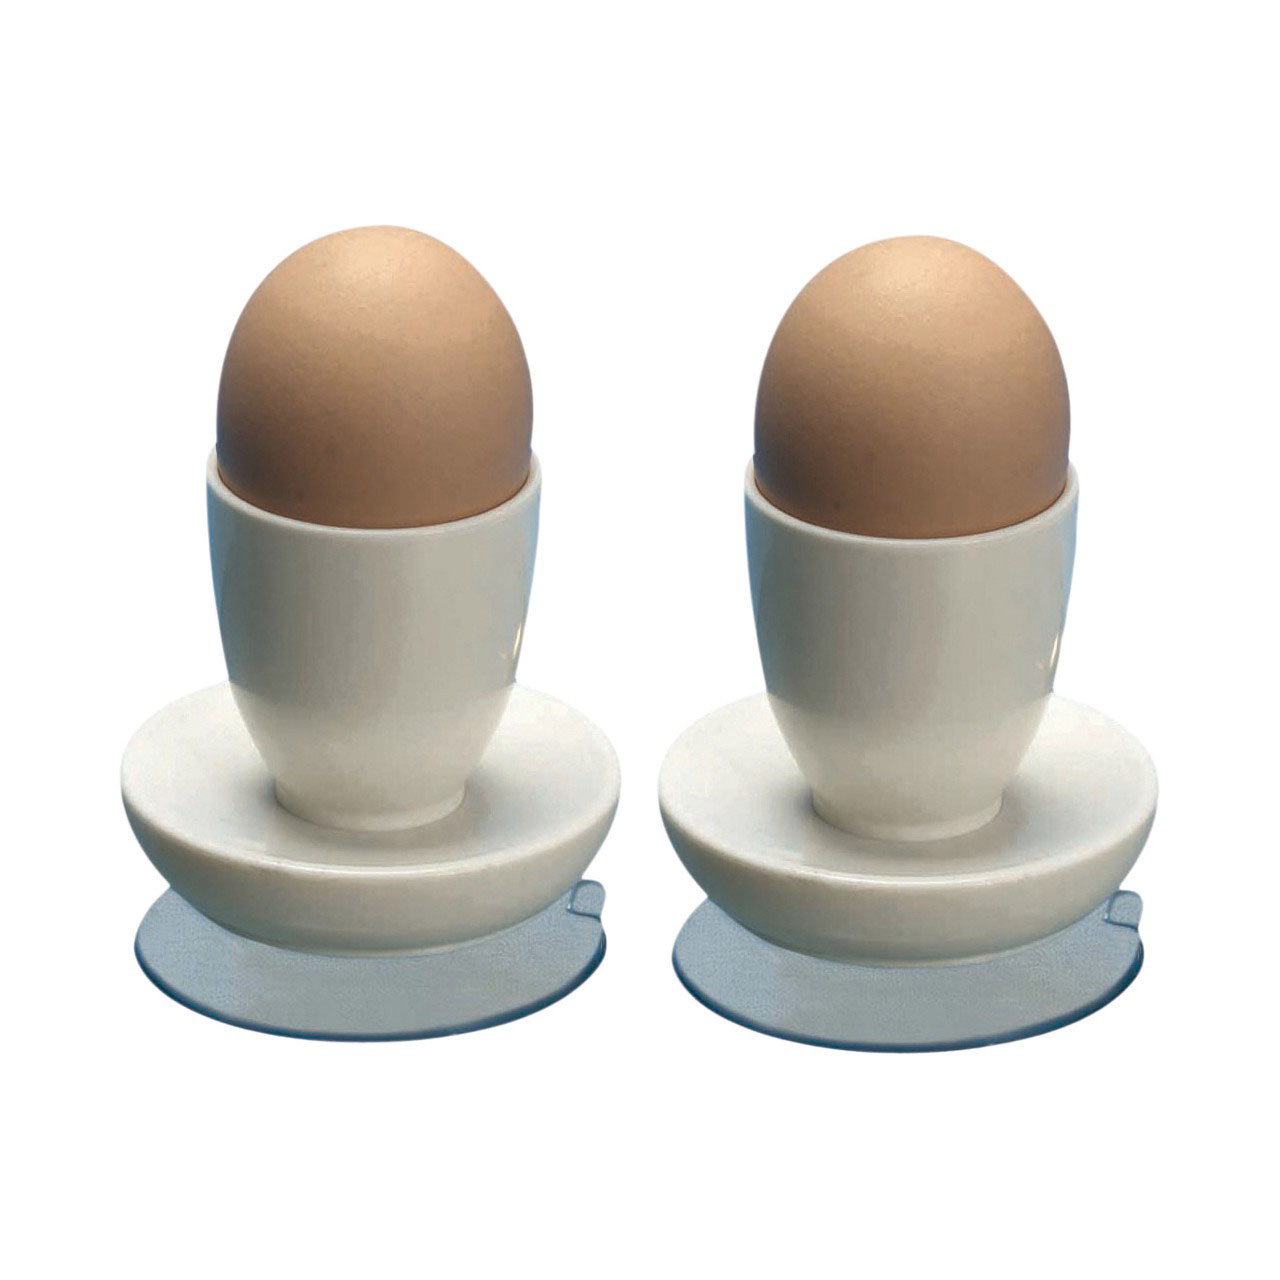 Egg Cups with Suction Base